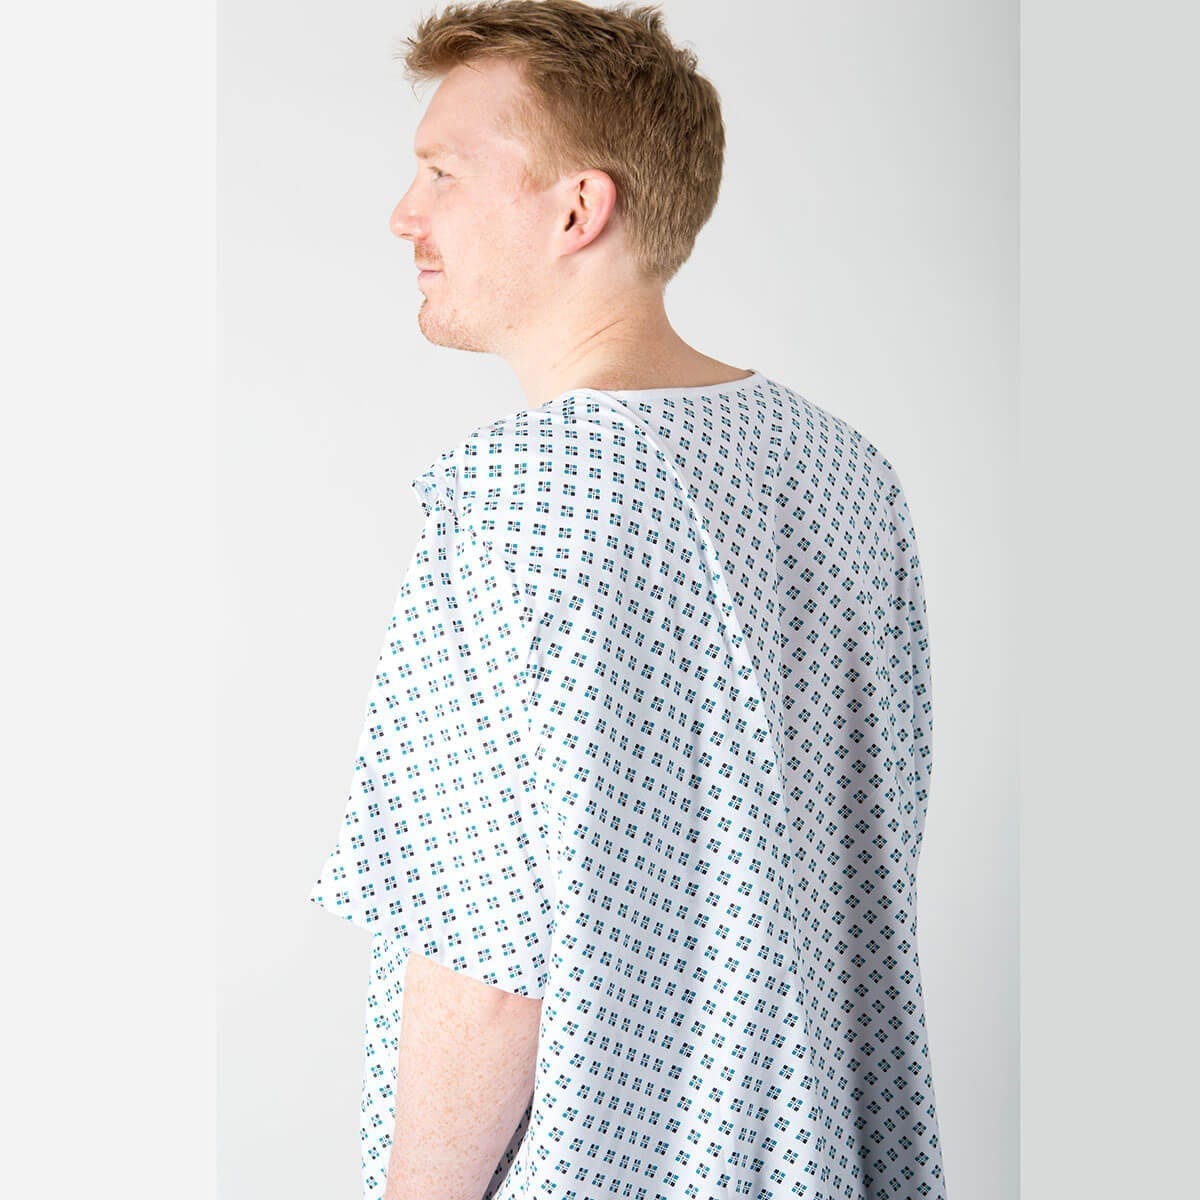 Hospital toga gown - side view